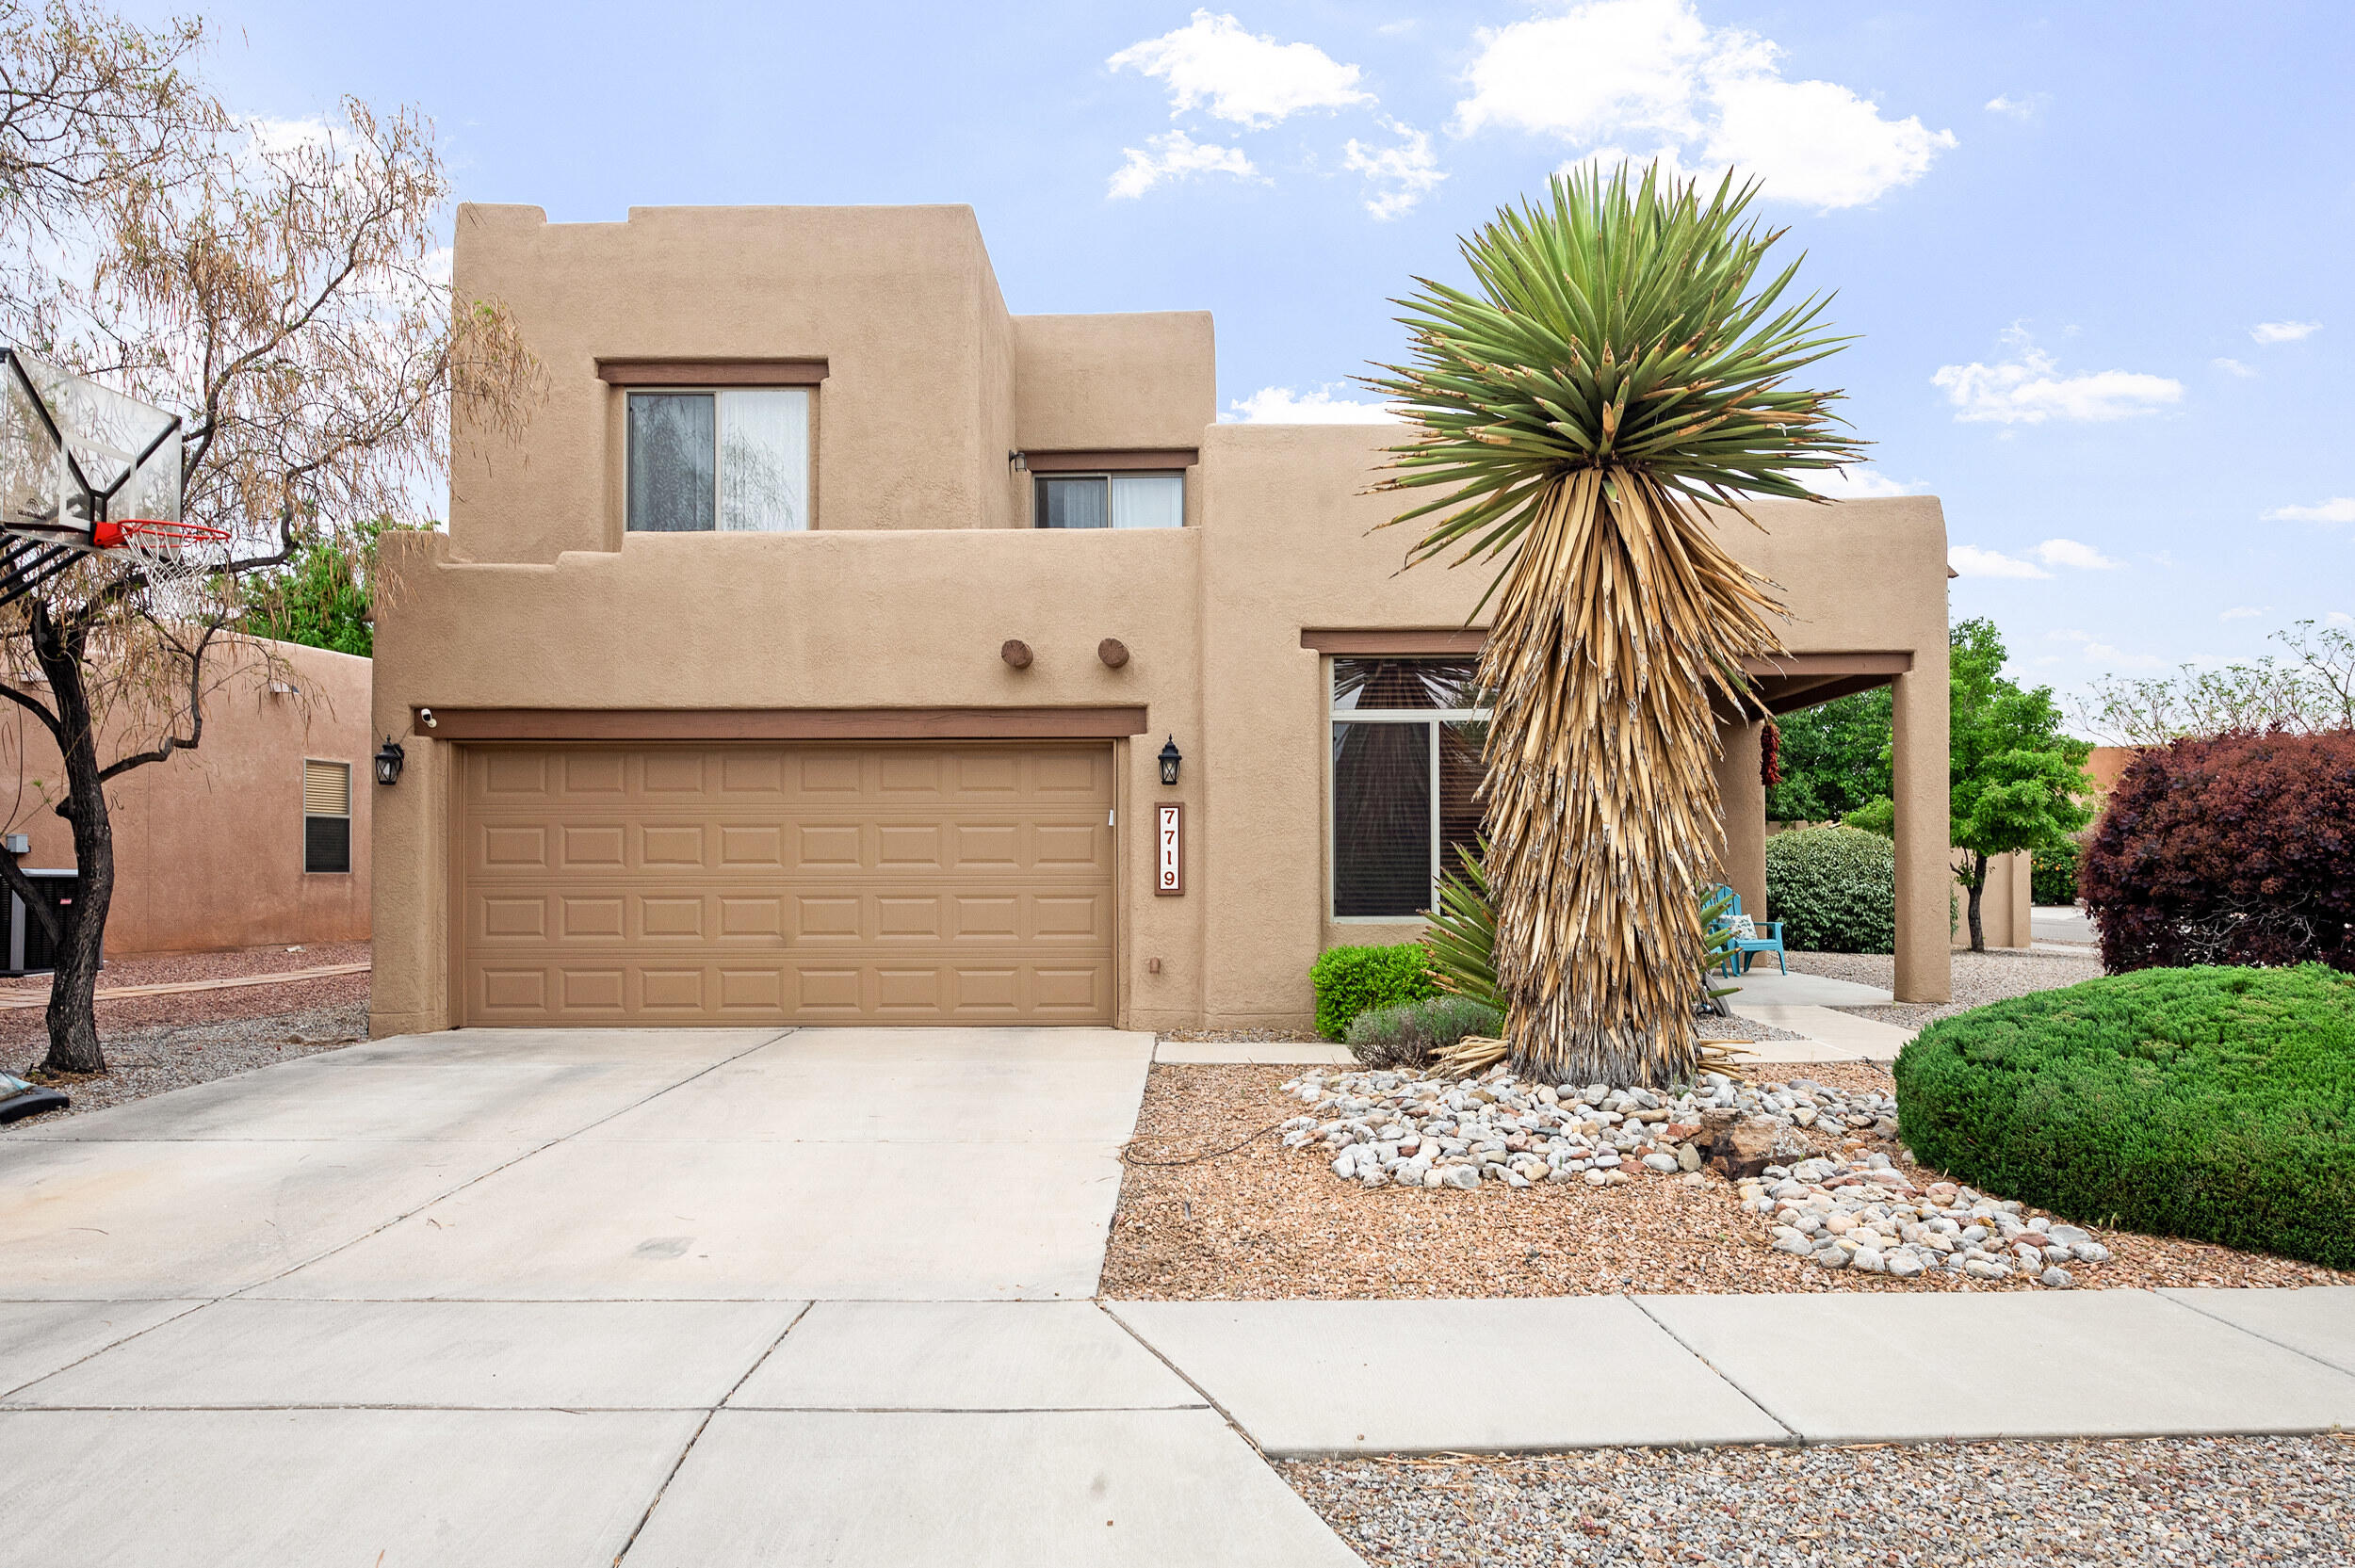 Welcome to this Gem in the highly sought after Vista Del Norte Neighborhood on a corner lot!This home is packed with updates ,done to the 9's!You are greeted with custom travertine tile as you walk in, leading you into the open concept chefs kitchen that features SS appliances,granite countertops,custom tile backsplash, & modern fixtures.The living room boasts tall ceilings with exposed wooden beams & tongue and grove ceilings, that give the property a charming SW feel throughout. Walk into your oversized master suite w/ private balcony & amazing views. Experience Luxury with your large bathroom suite w/ garden tub & separate custom tile shower, with your own oversized California Style Closet. Separate private office from the other 3 bedrooms! This backyard is an entertainers dream!